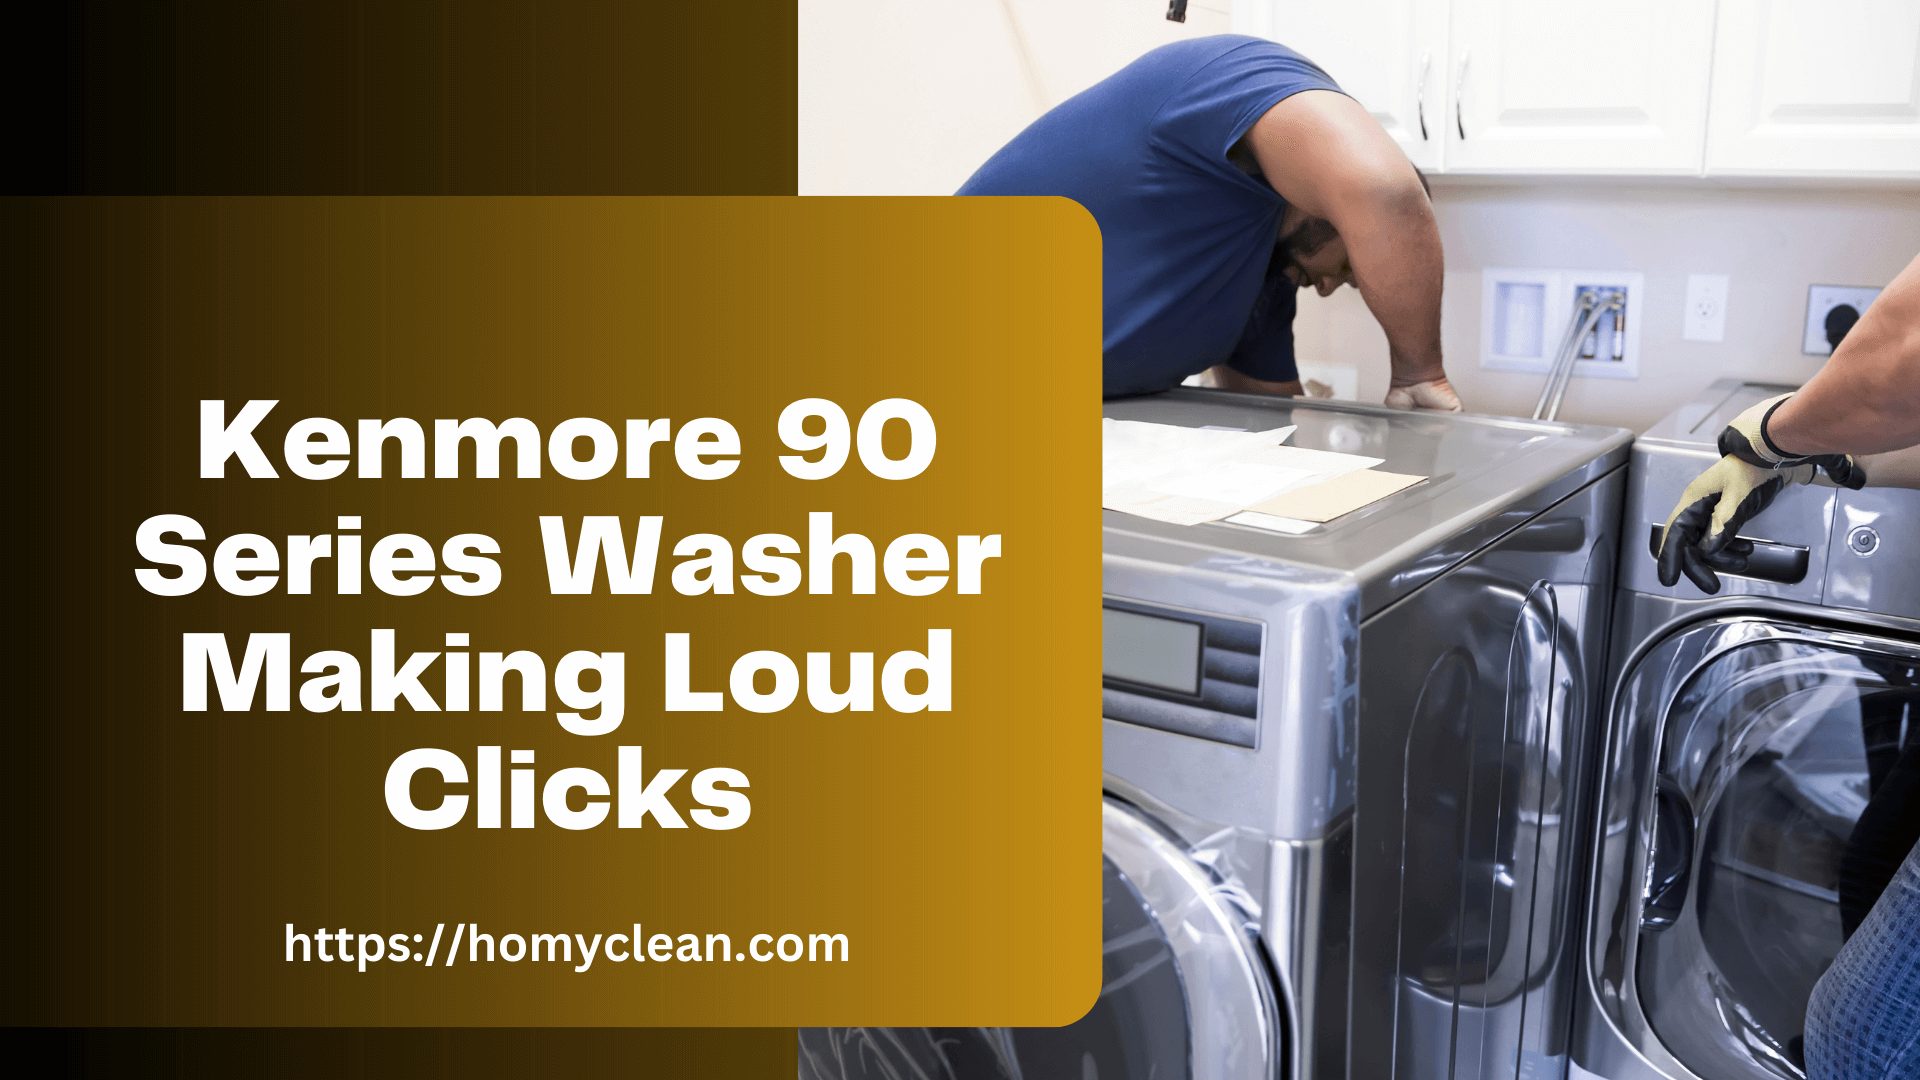 Kenmore 90 Series Washer Making Loud Clicks: Troubleshooting and Solutions